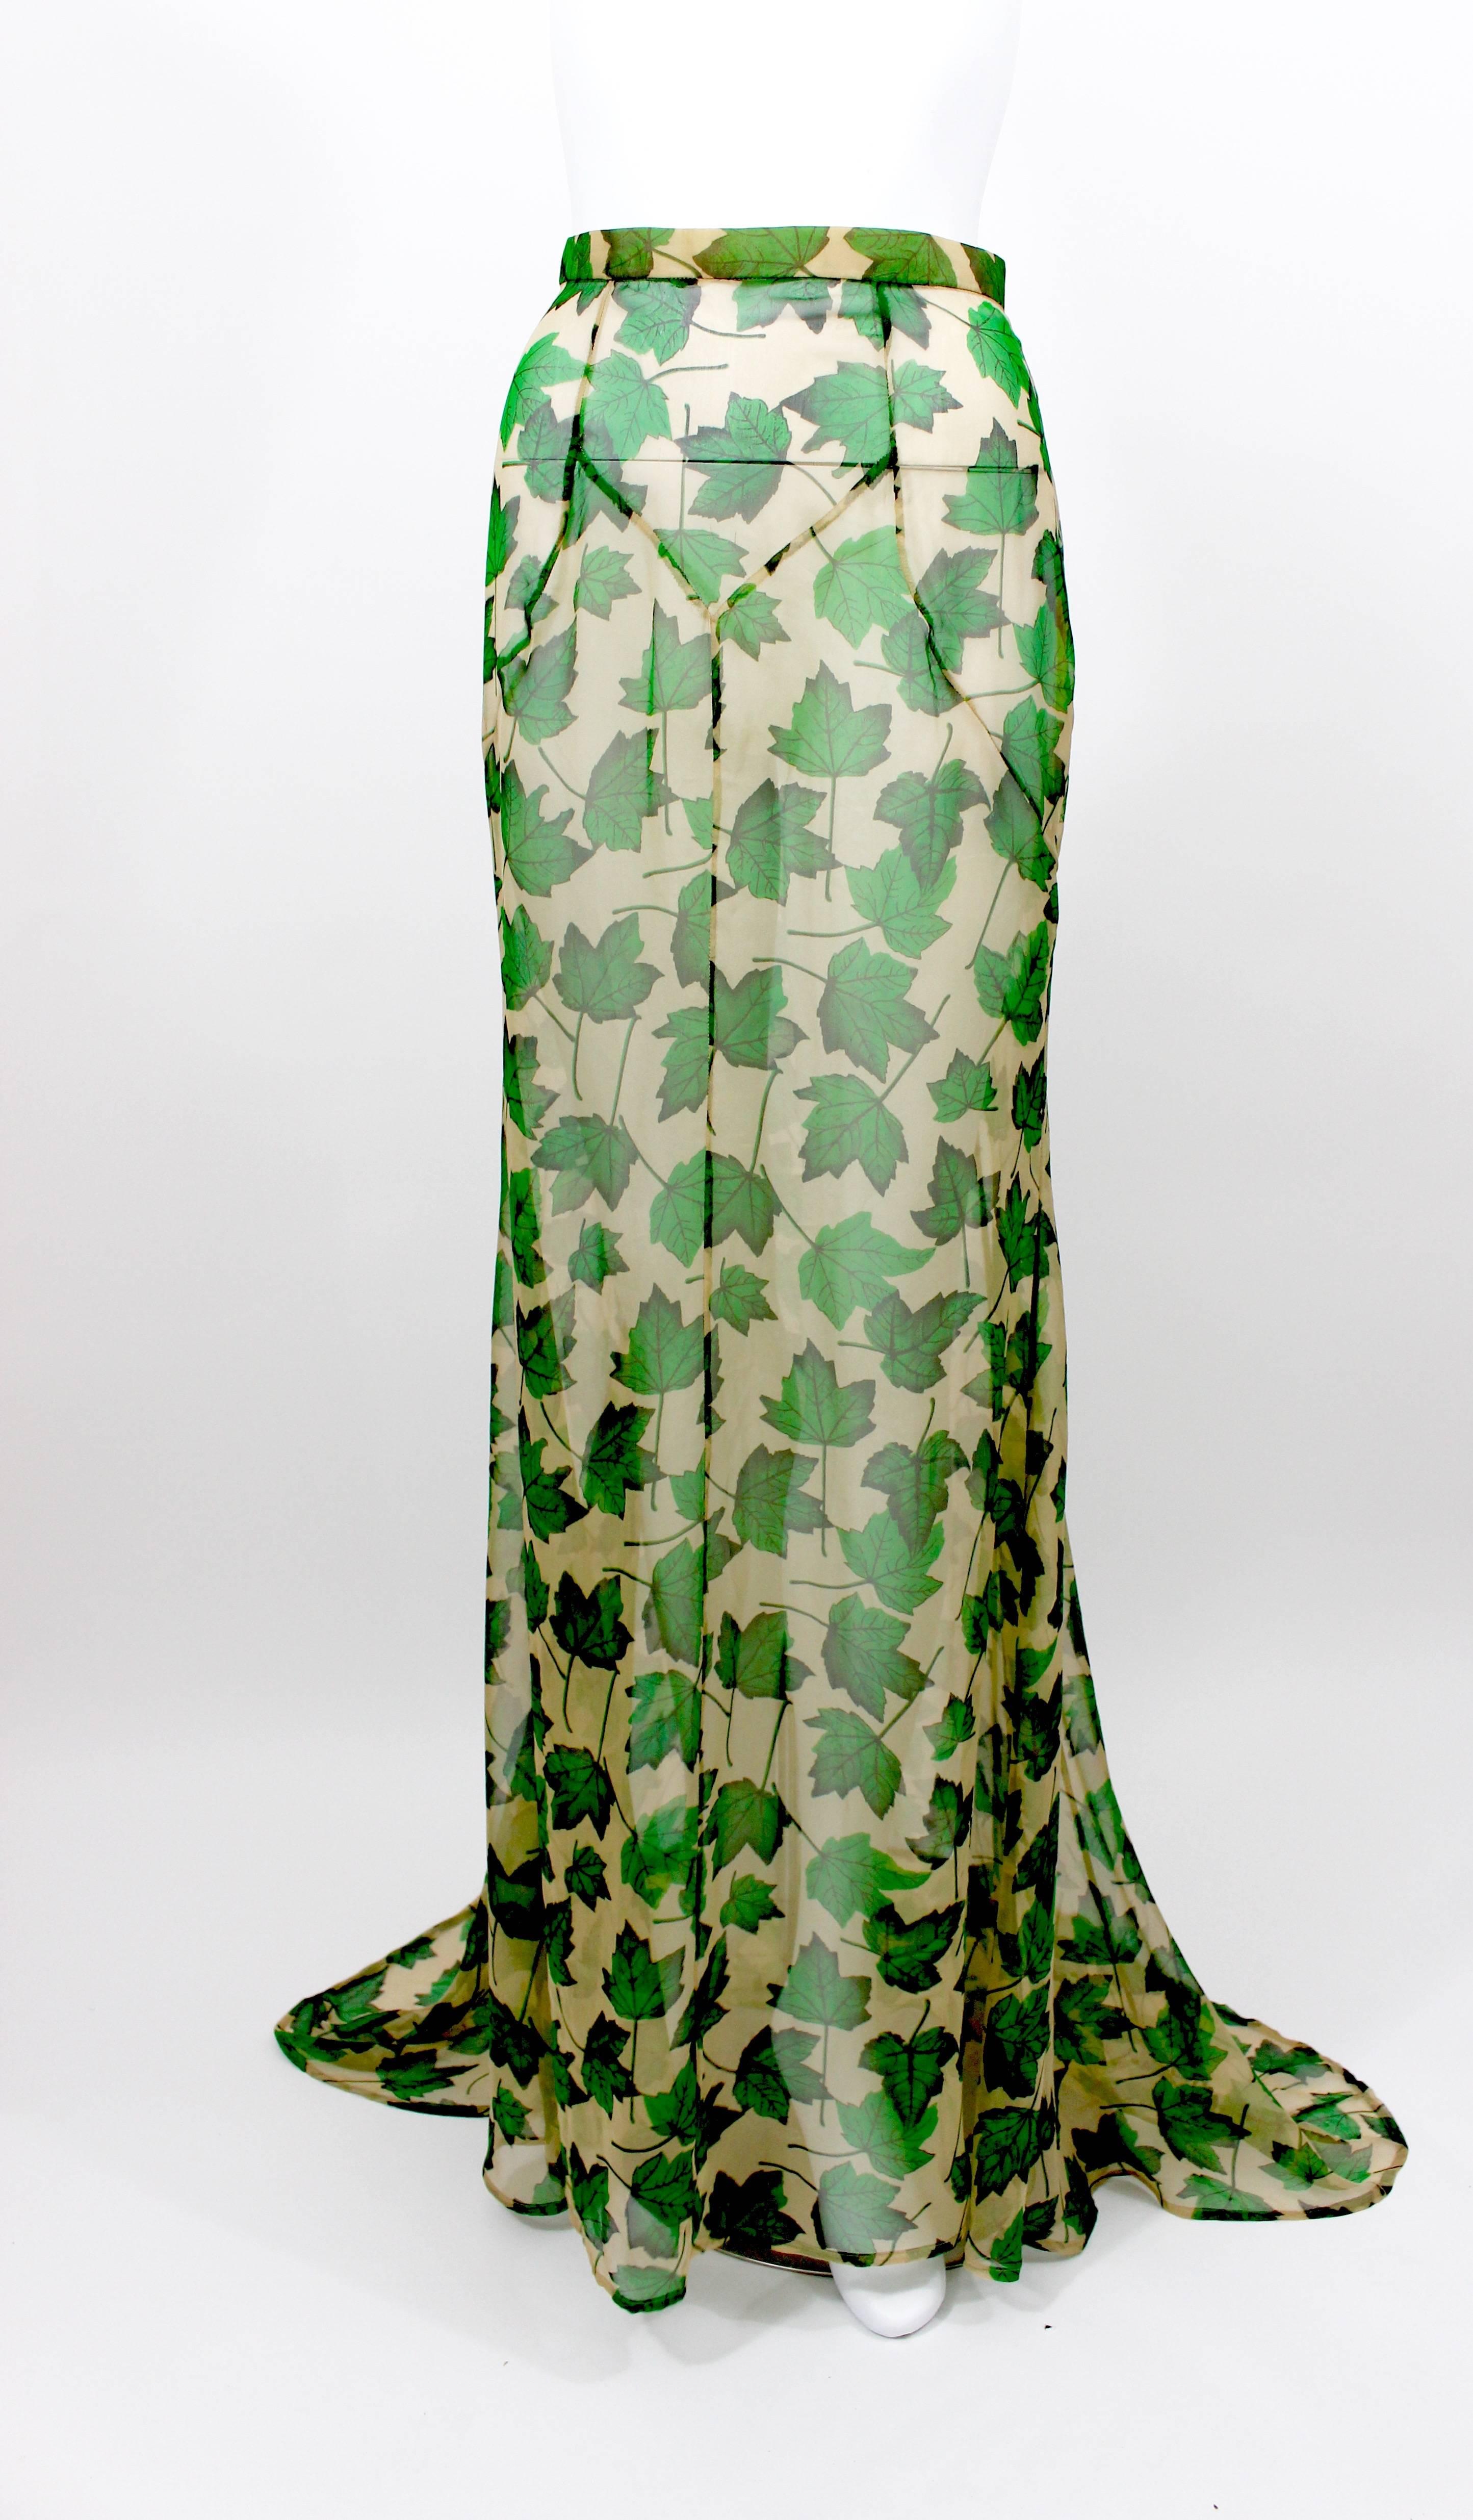 A beautiful figure flattering gown skirt with a train from Dolce & Gabbana. Fashioned from transparent beige silk chiffon with a vivid green and black falling leaves print throughout. 
Measurements: 
Waist: 25 inches
Hips: 36 inches 
Length